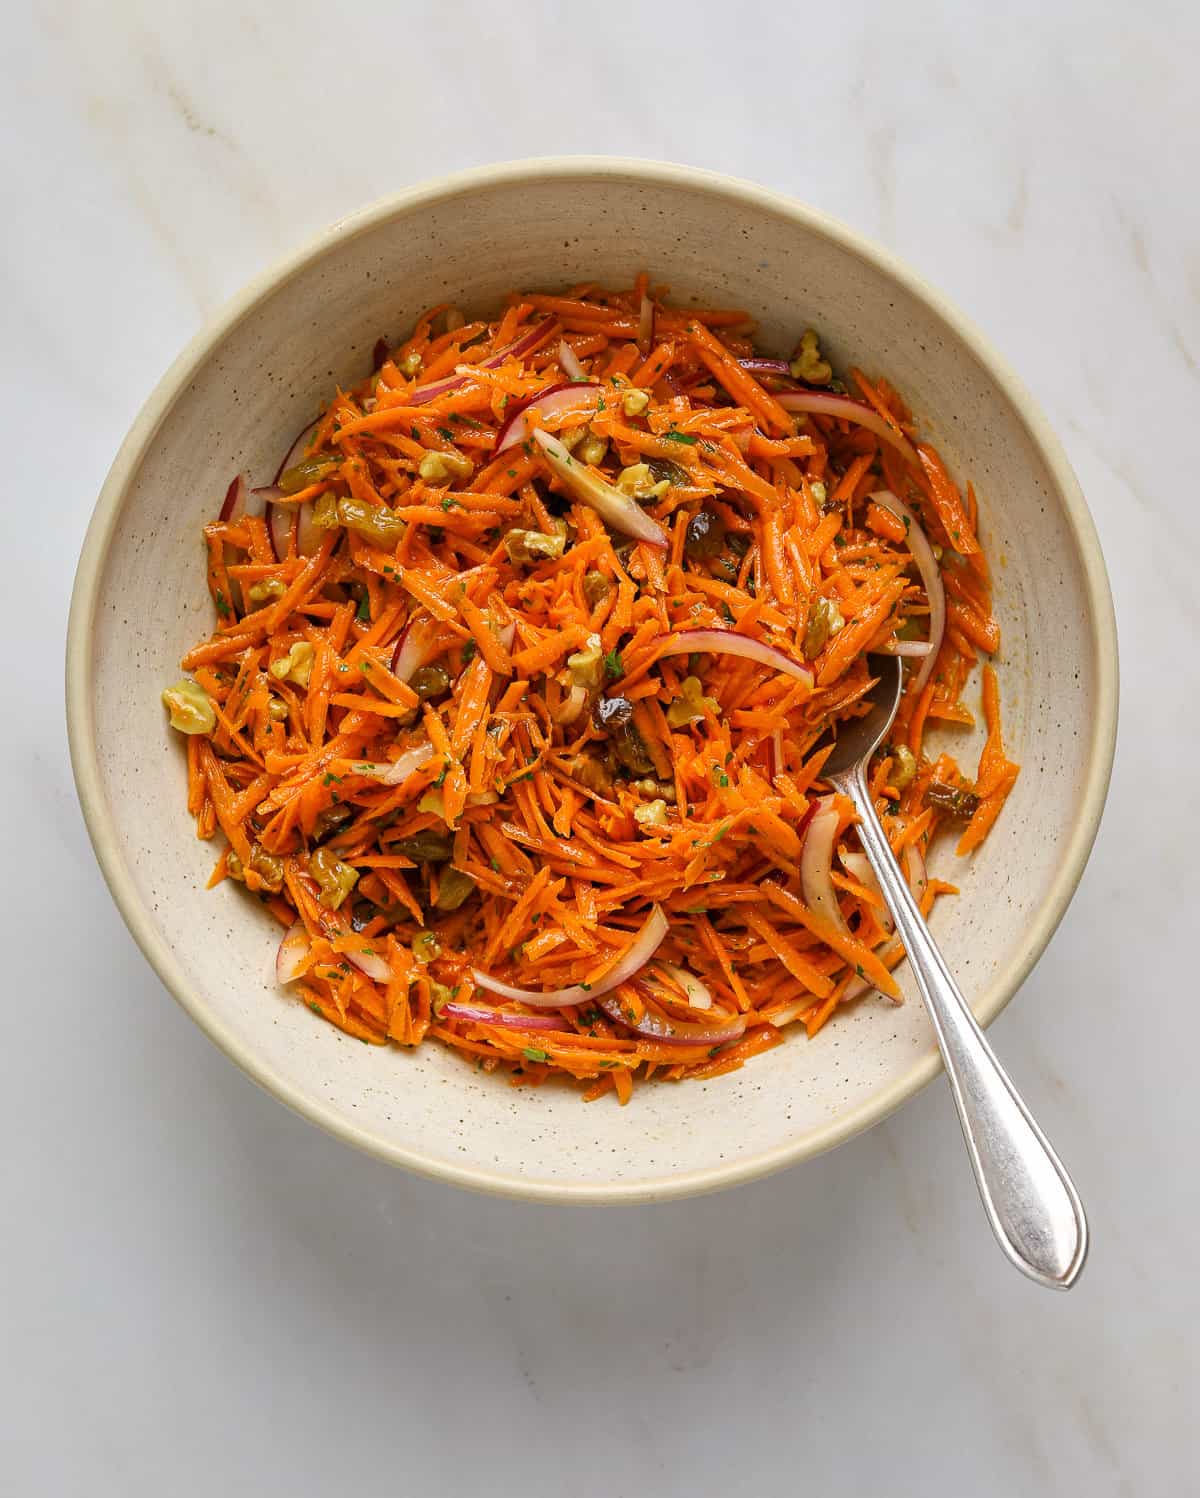 A speckled ceramic bowl filled with a grated carrot slaw, red onion slivers and raisins.